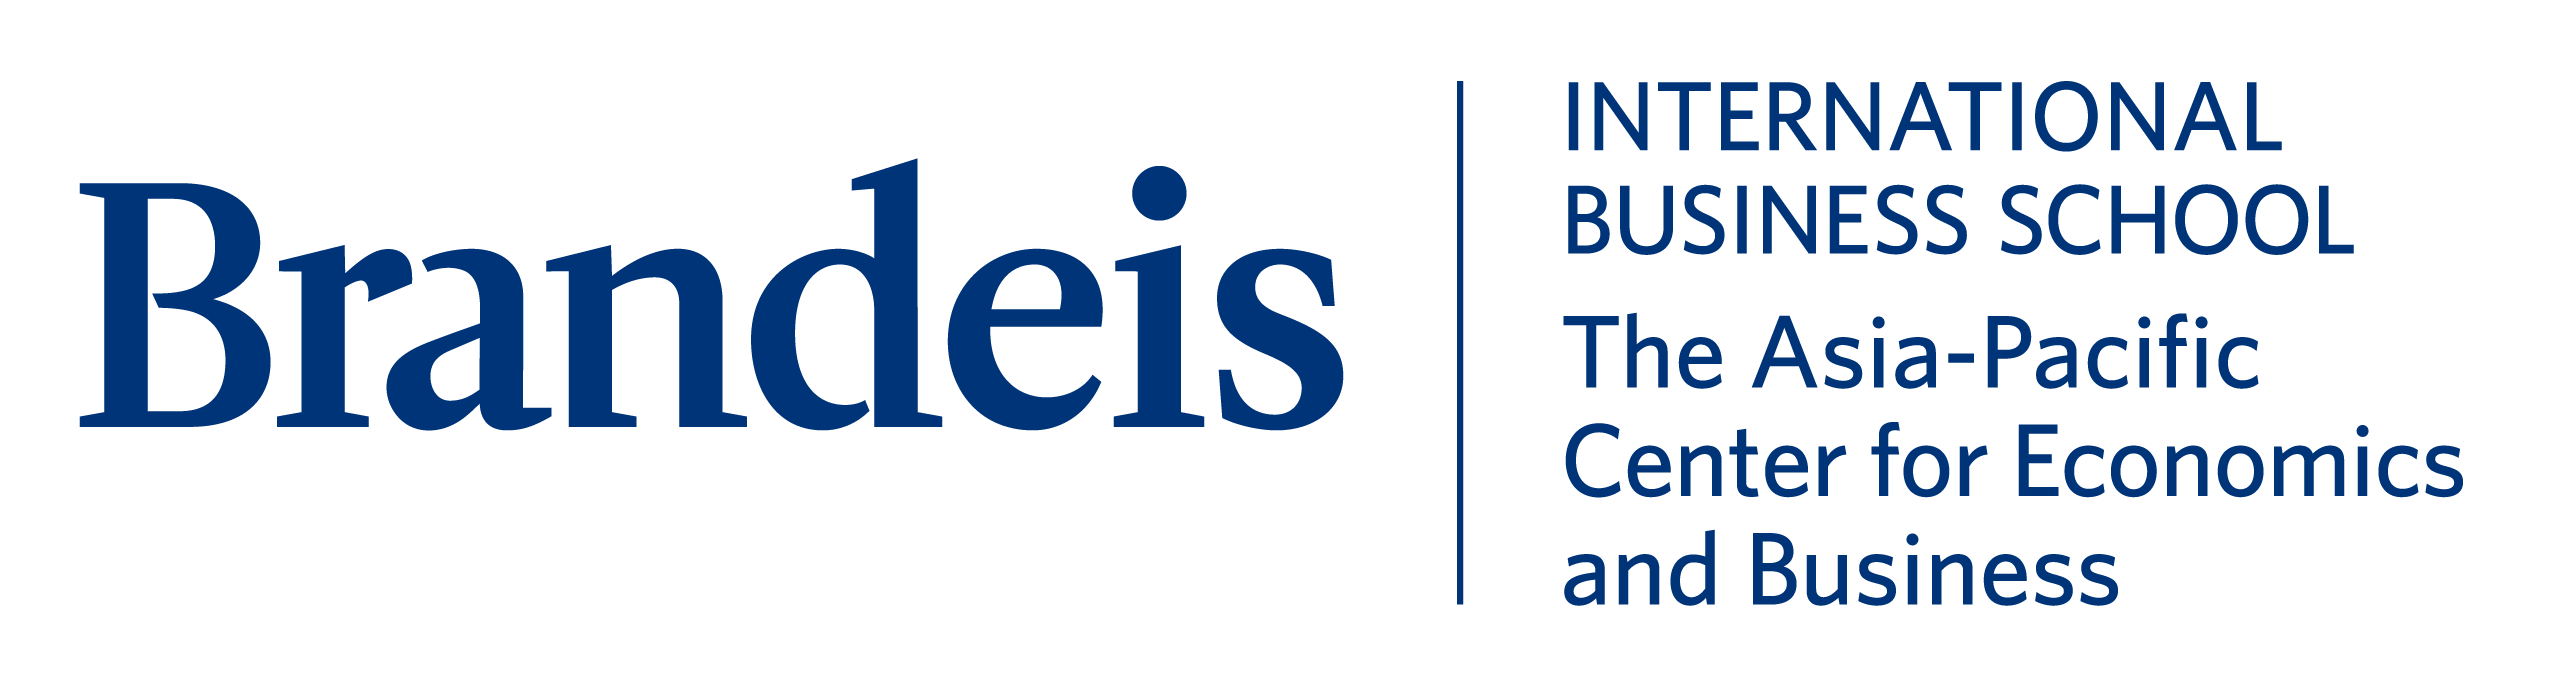 Brandeis University International Business School, The Asia-Pacific Center for Economics and Business